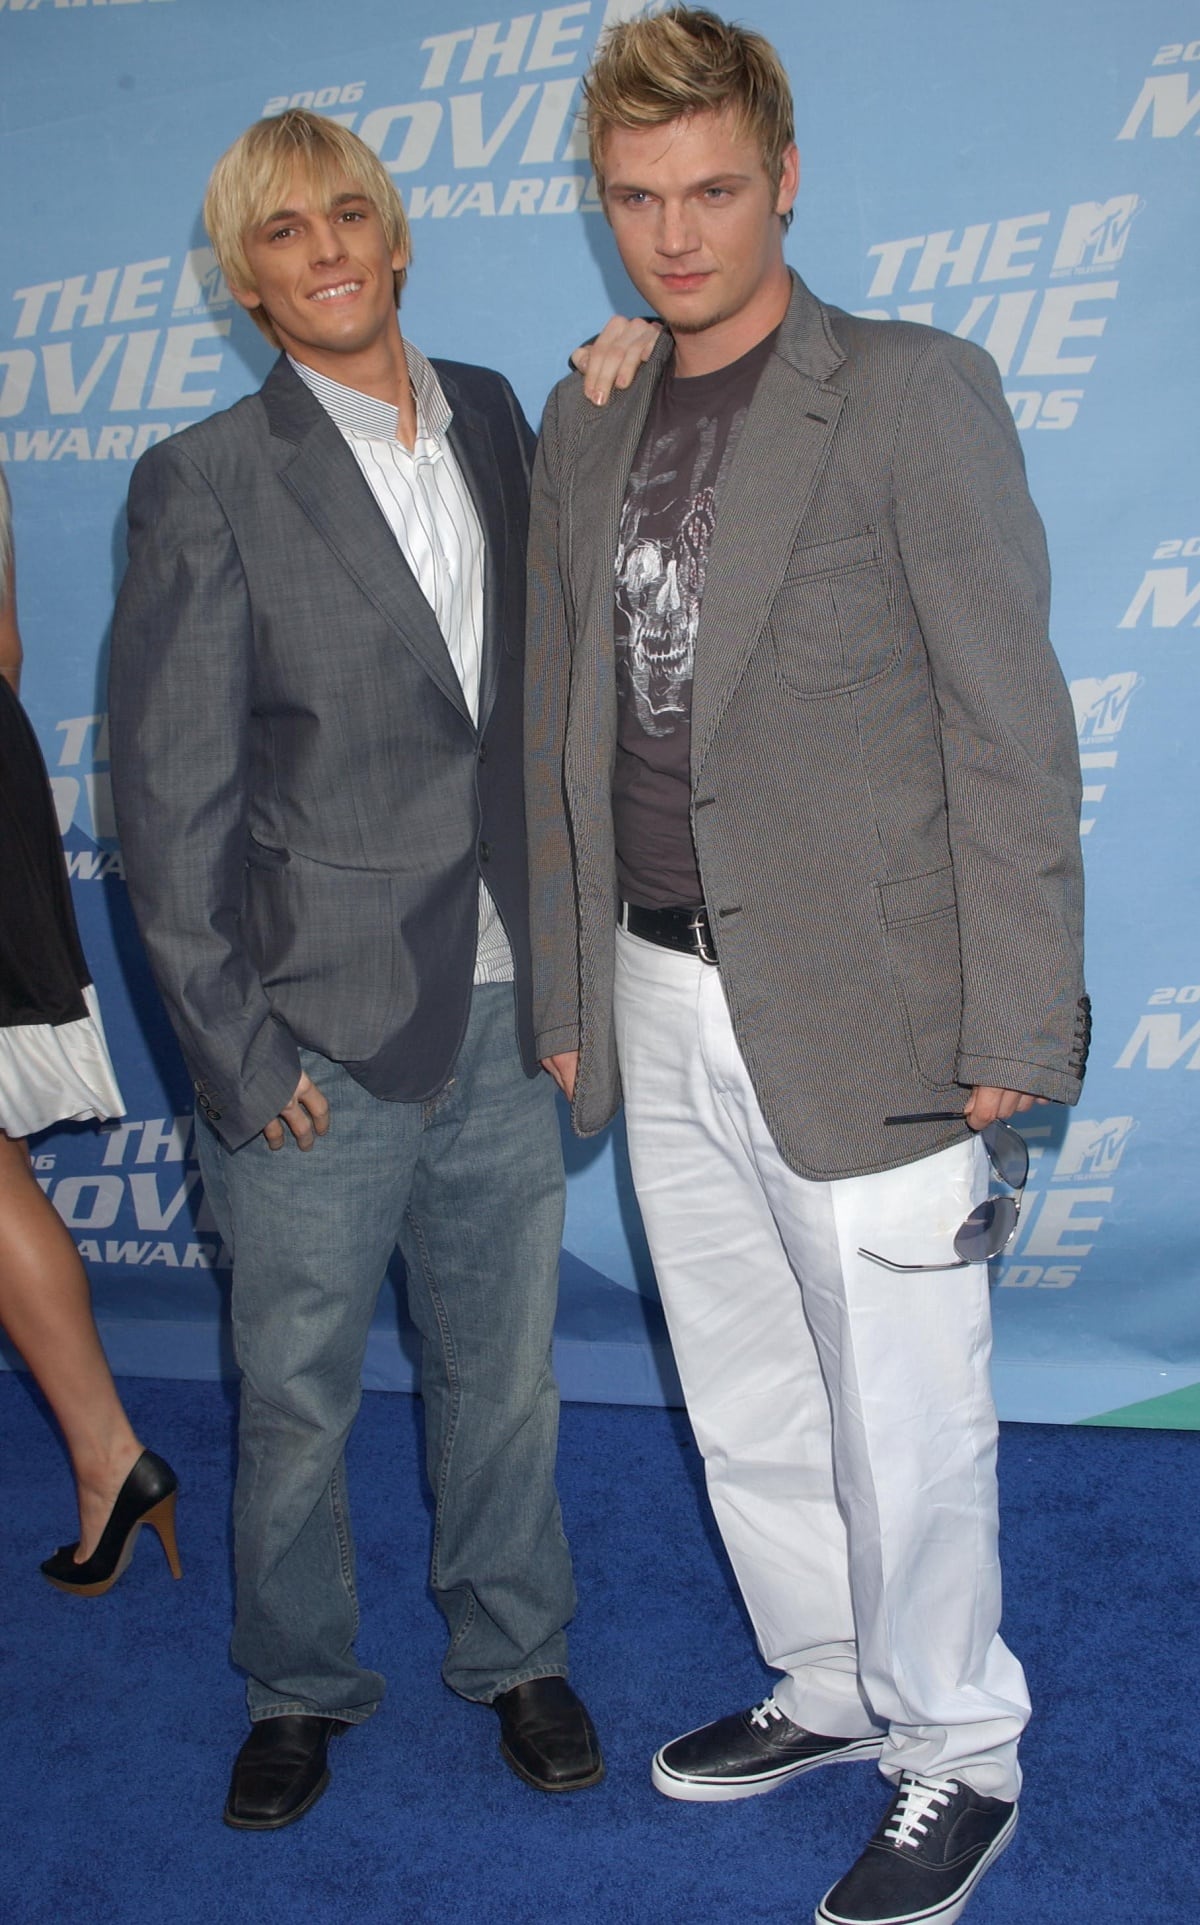 Aaron Carter and Nick Carter attending the 2006 MTV Movie Awards